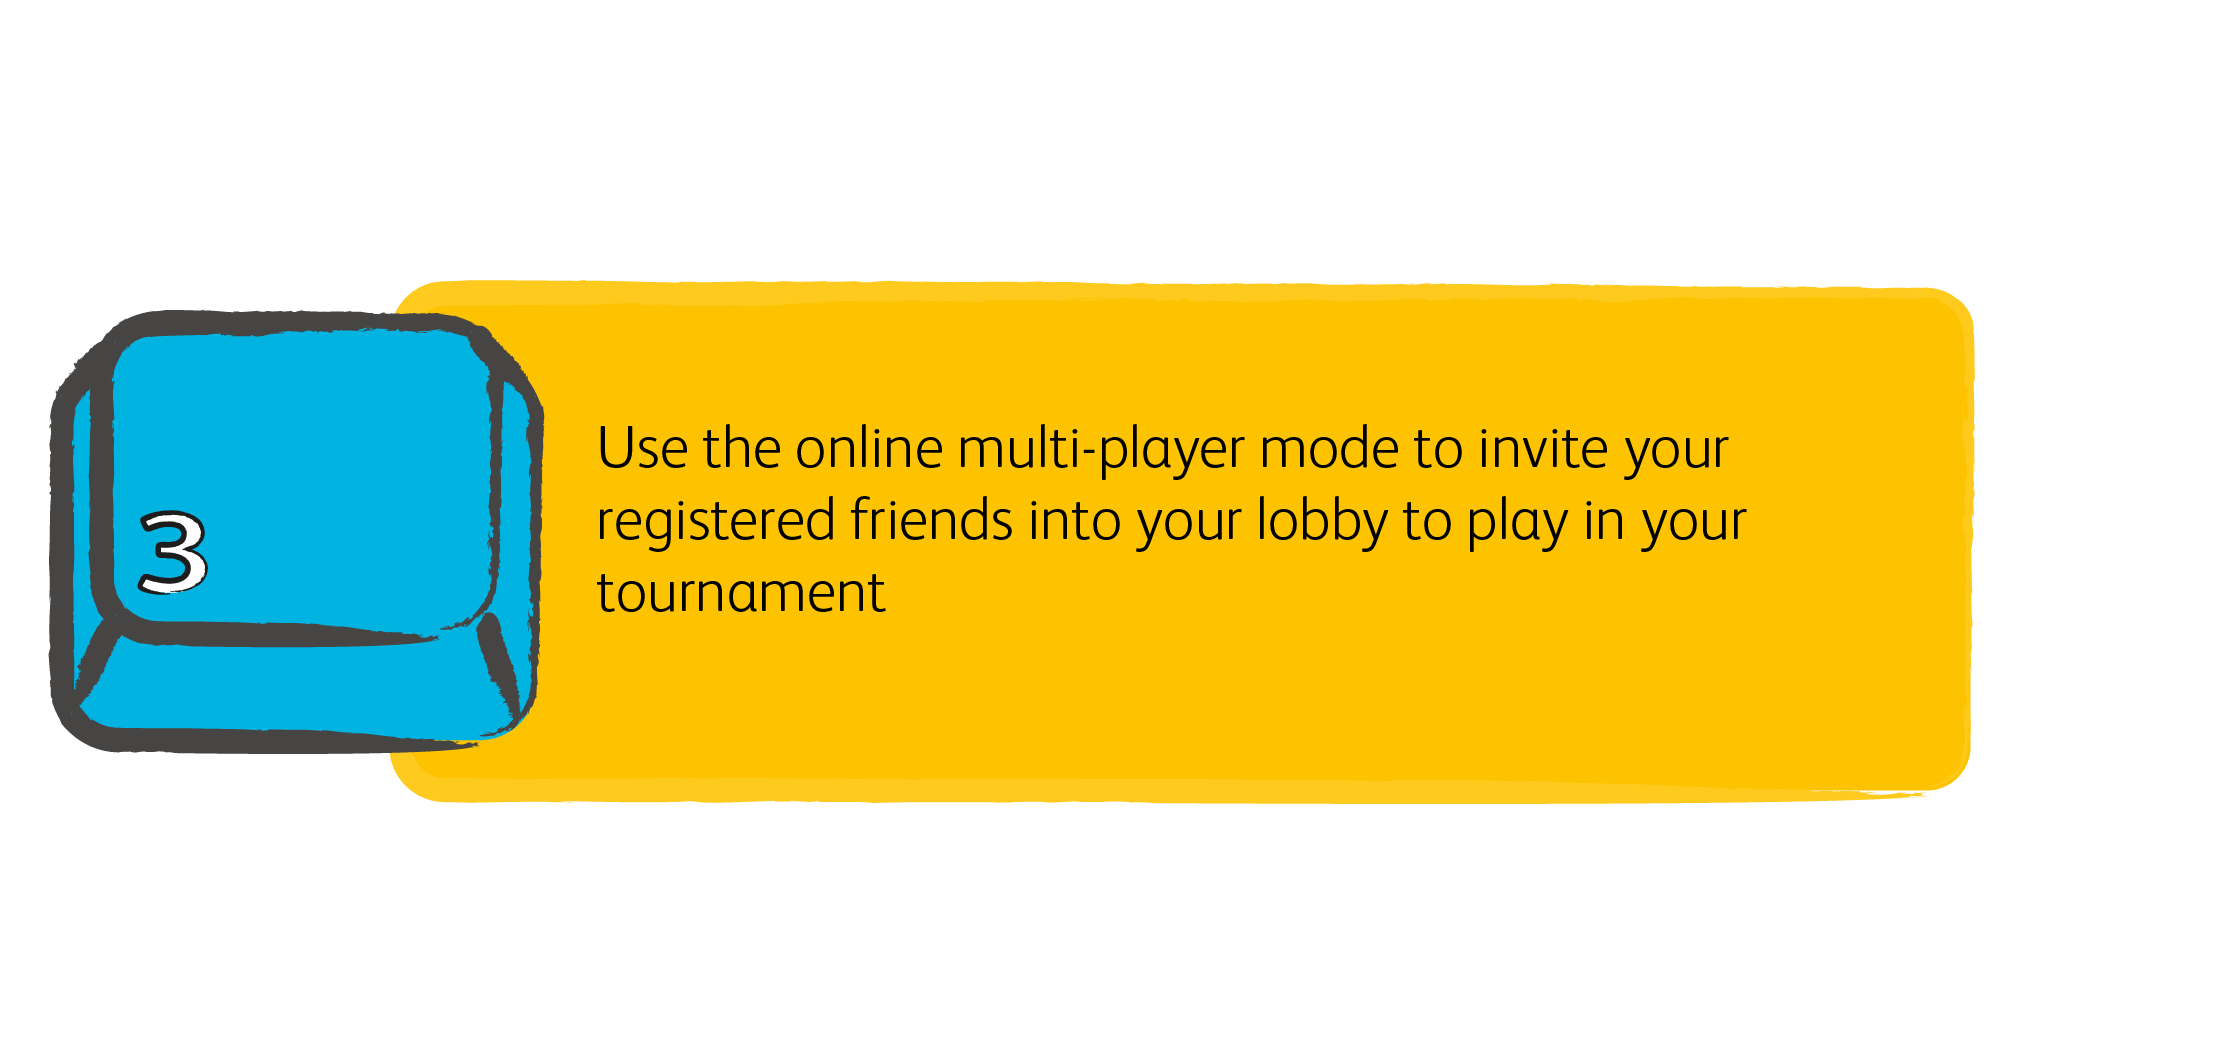 3. Use the online multi-player mode to invite your registered friends into your lobby to play in your tournament